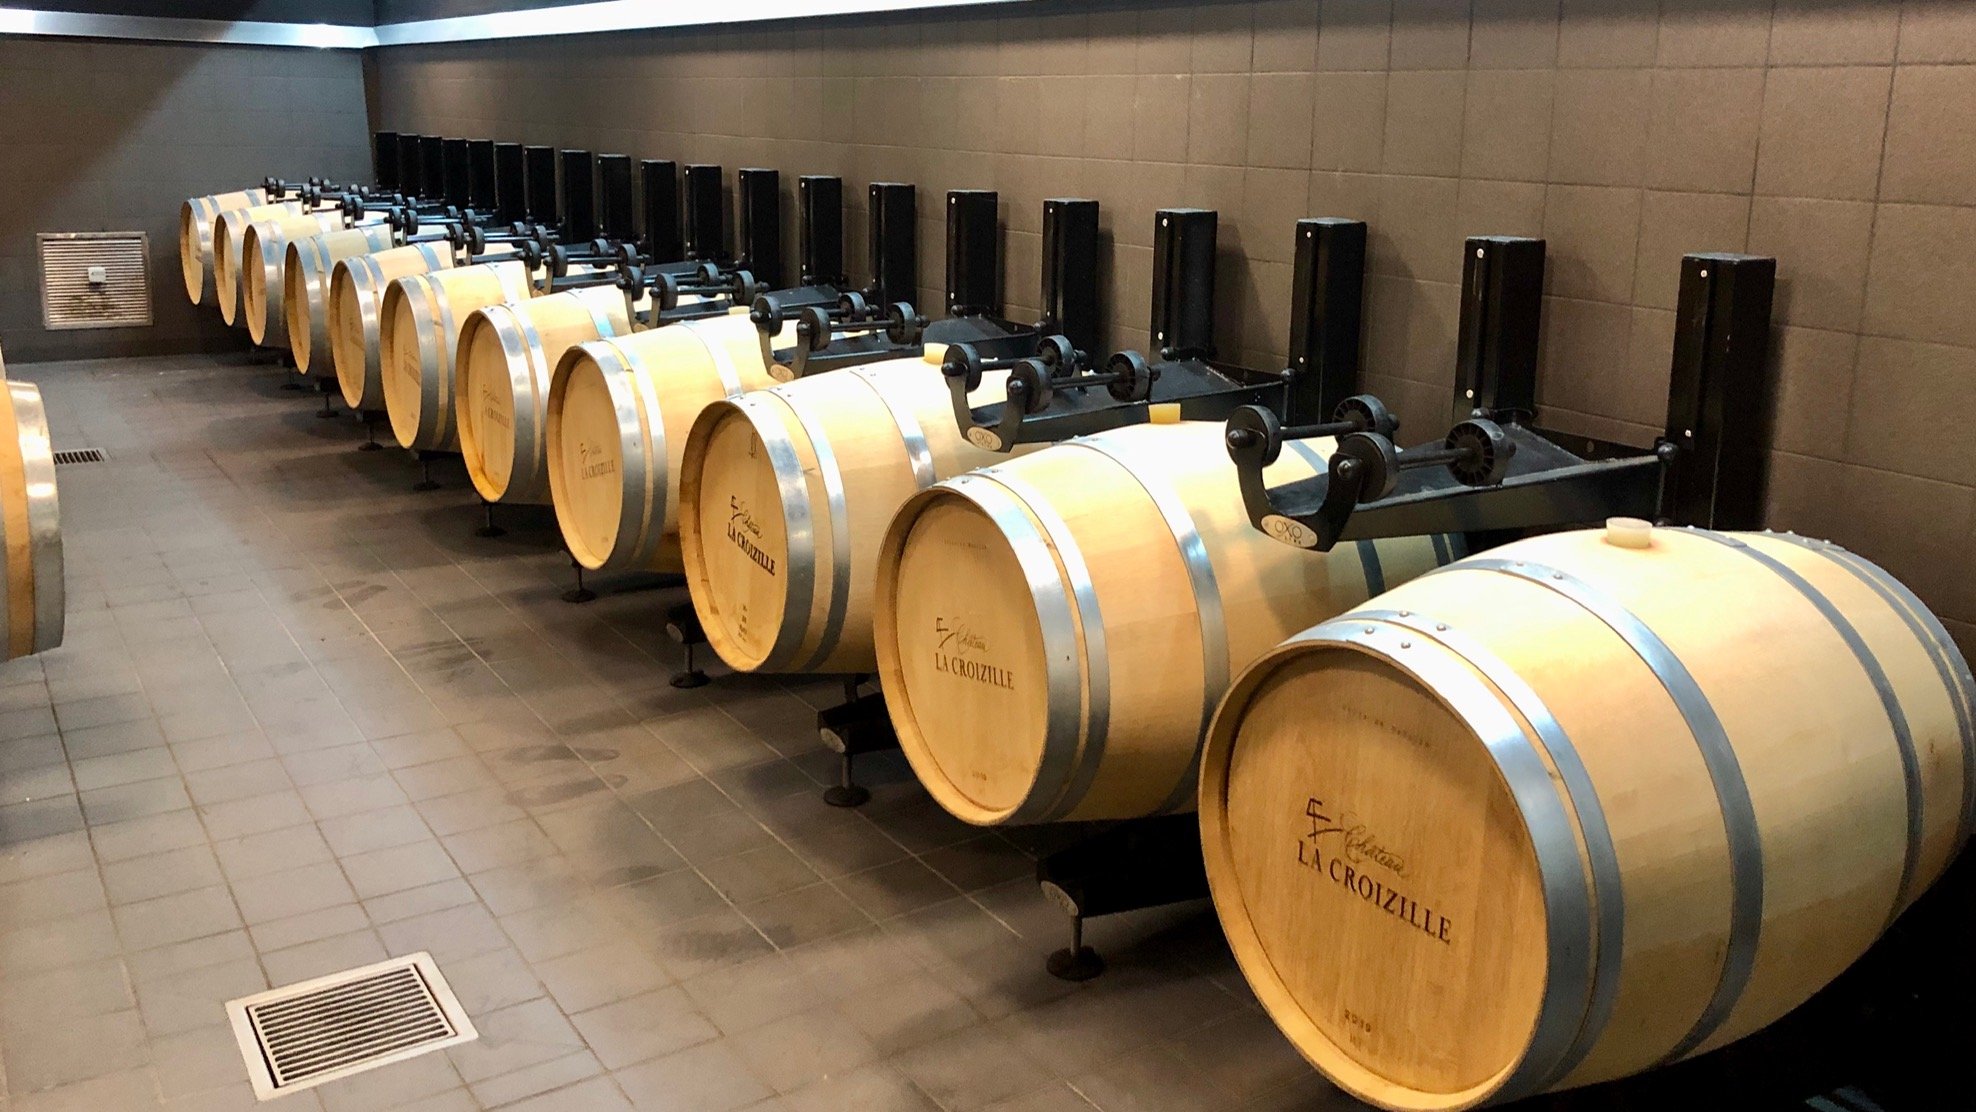  One of the other innovations that they use at Chateau La Croizille are these barrel holders that allow them to rotate the barrels during the aging process. 